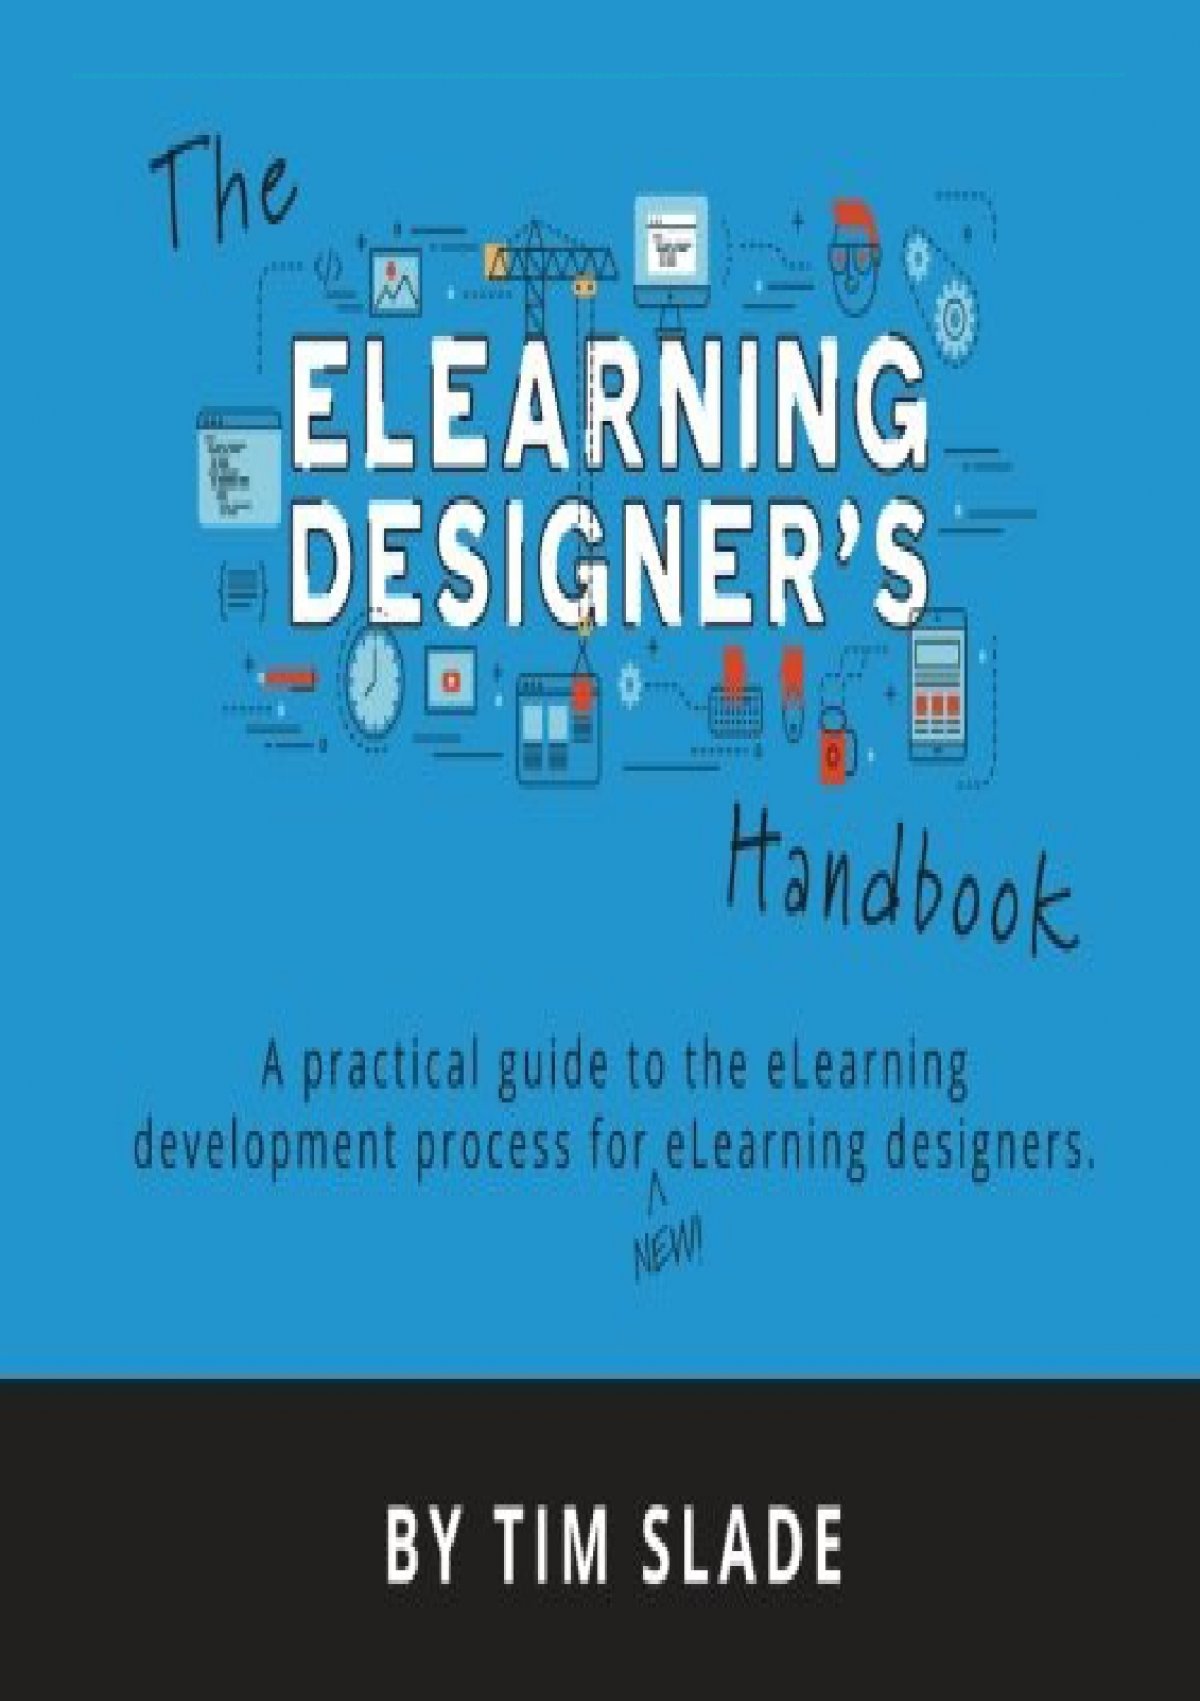 (PDF) The eLearning Designer #39 s Handbook: A Practical Guide to the